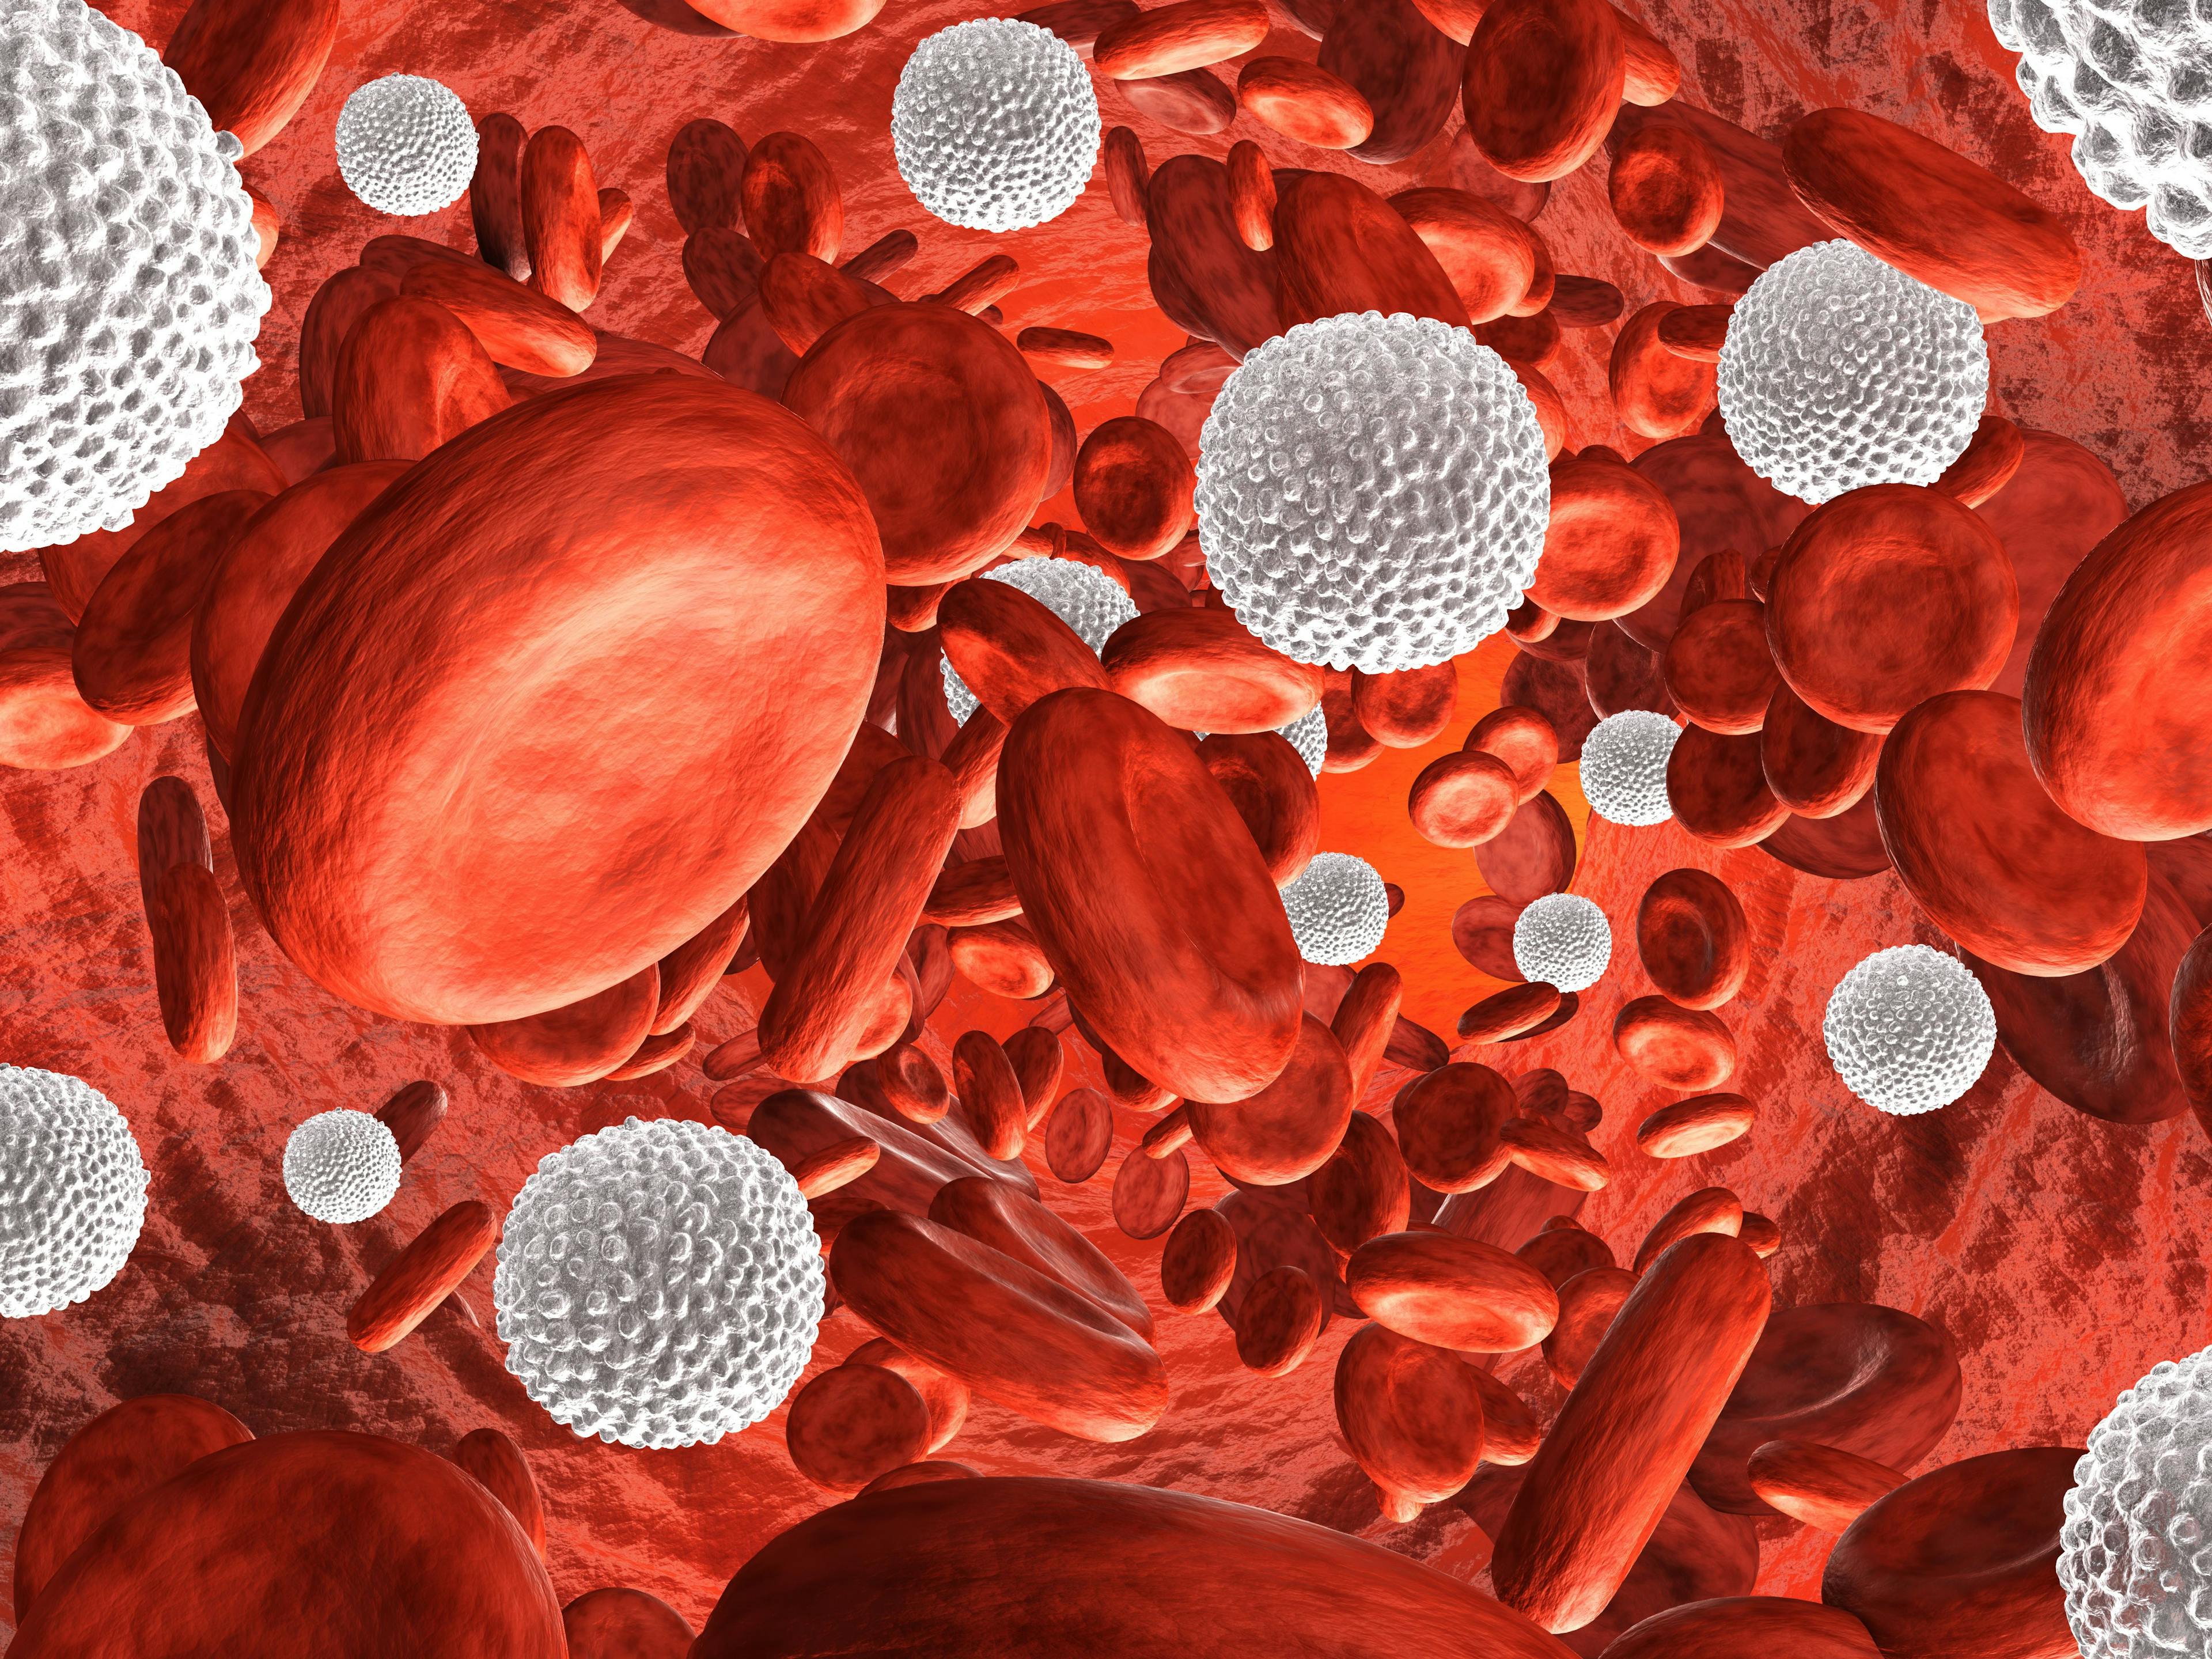 Trilaciclib Demonstrates Benefit Across Most Hematologic End Points for ES-SCLC Therapy